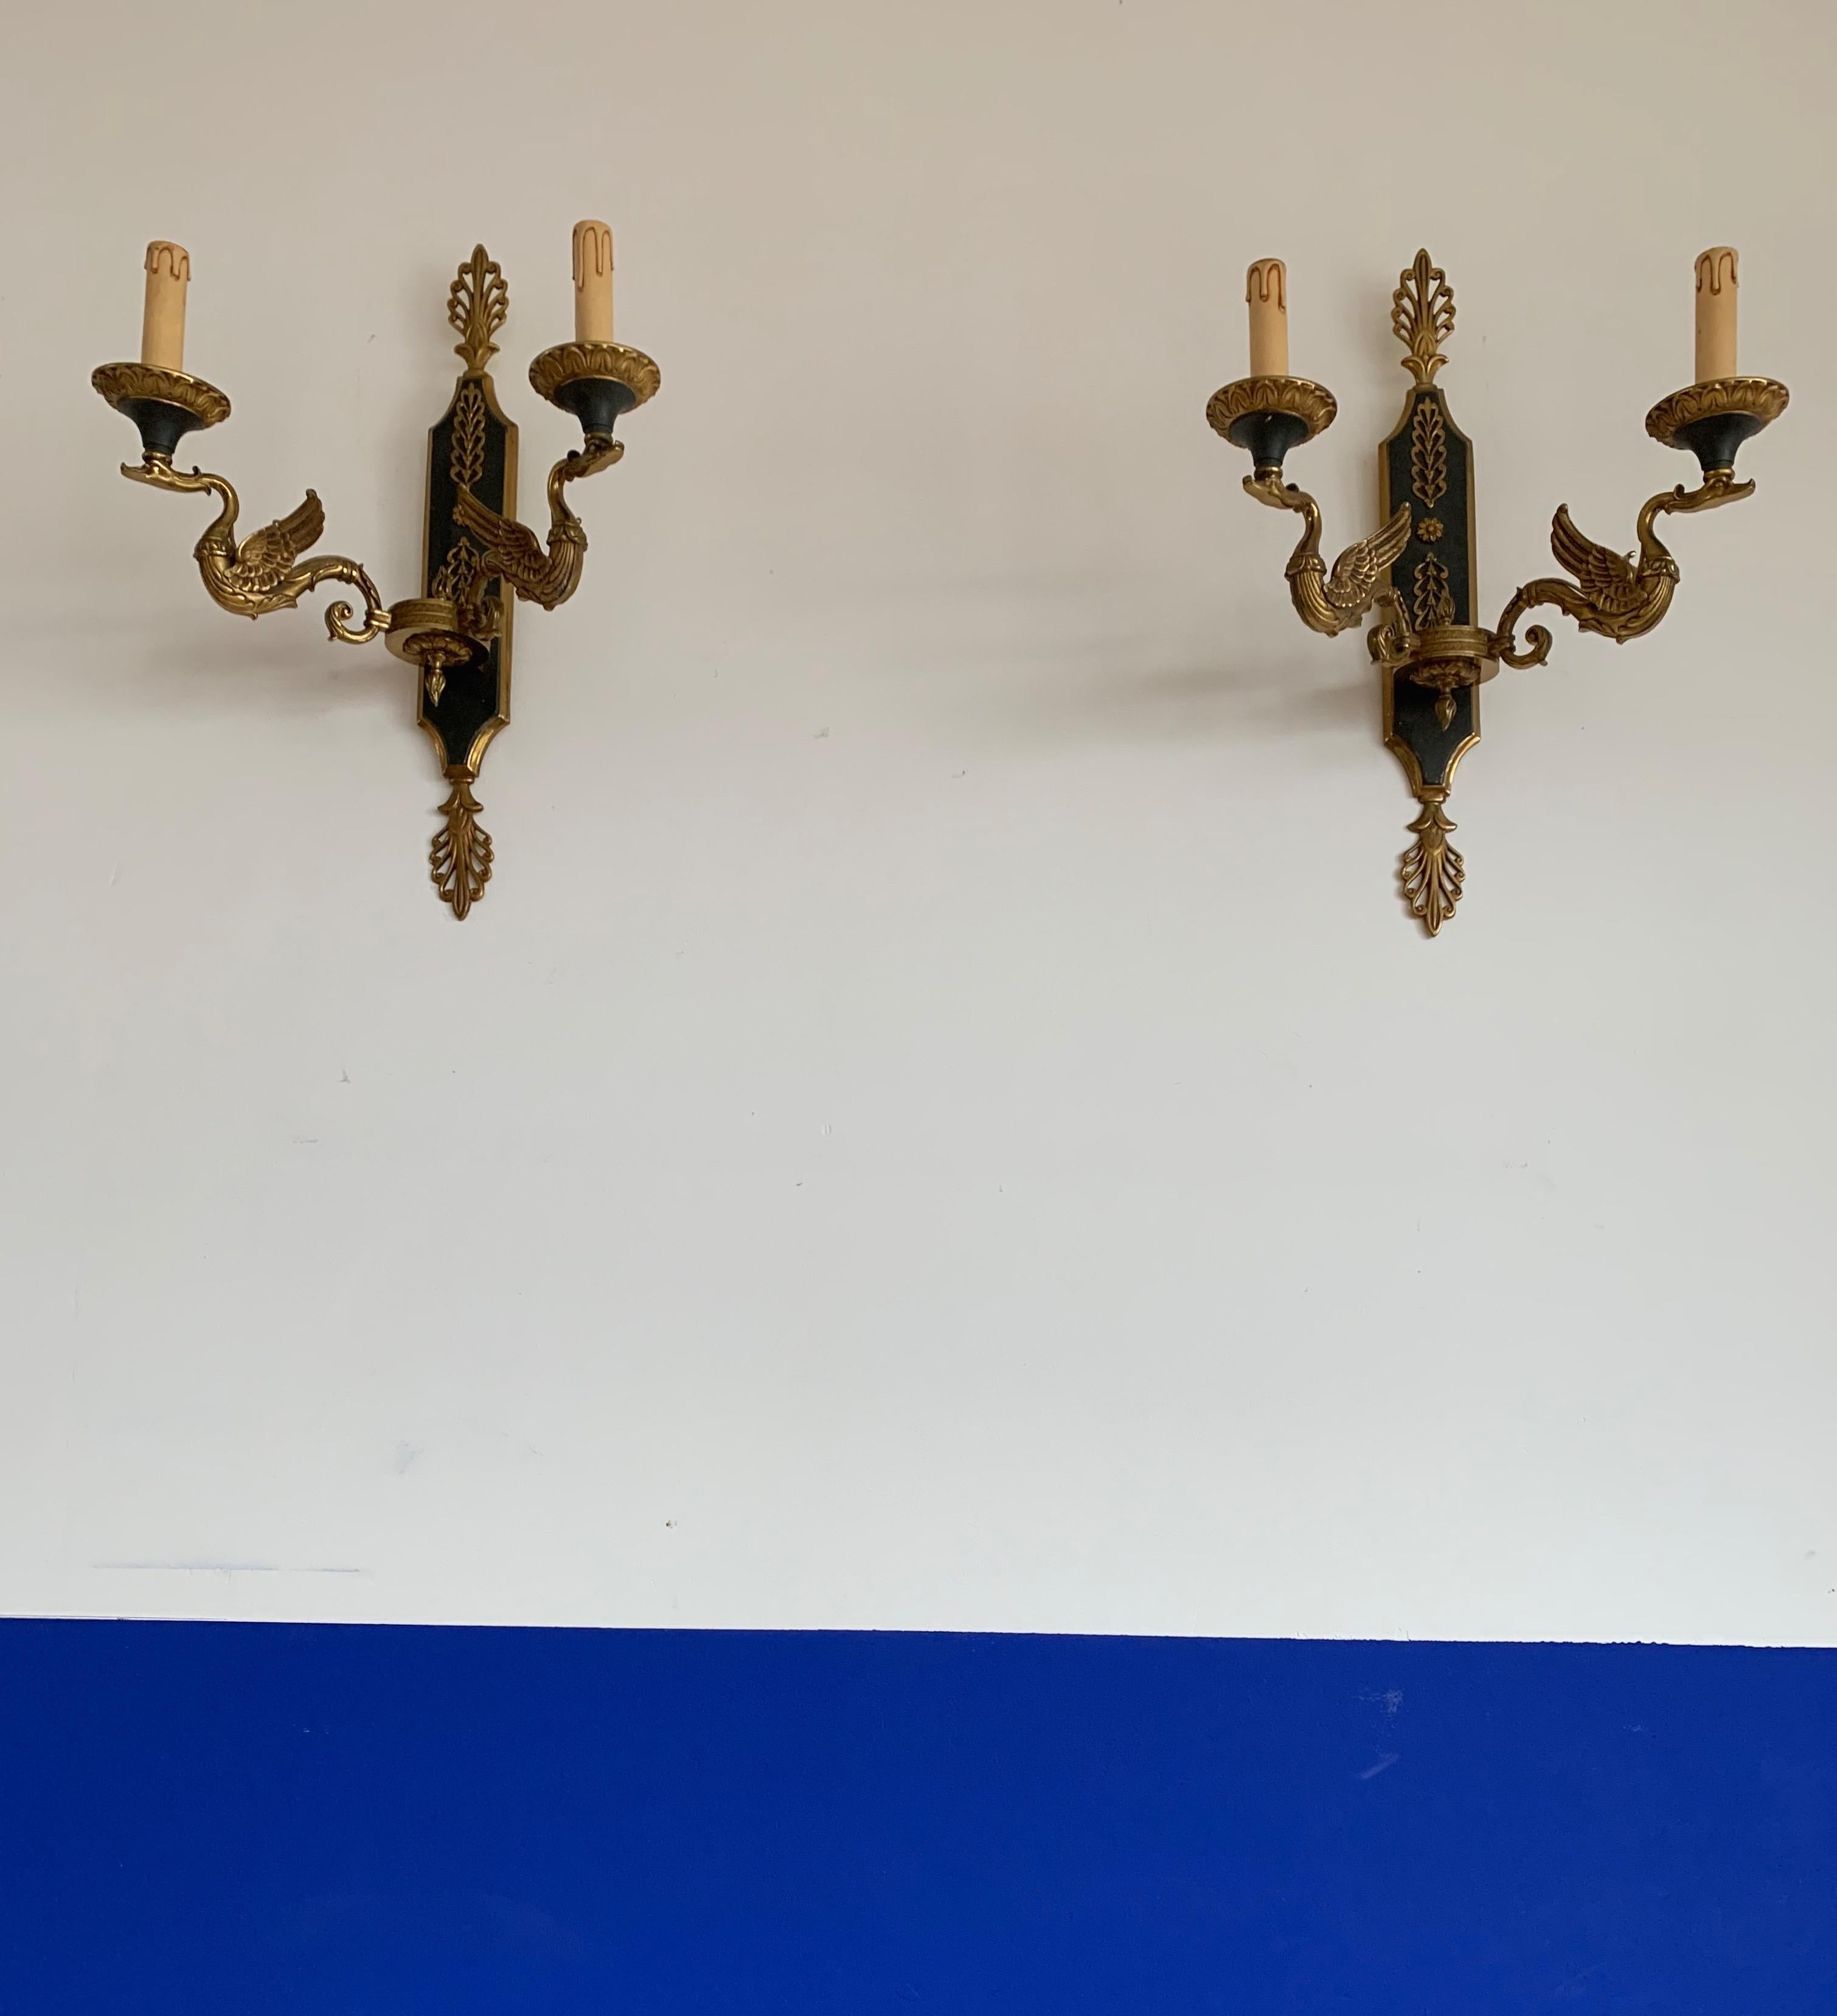 Stunning pair of near antique and all handcrafted bronze wall sconces.

These rare and majestic wall sconces were designed and all handcrafted in mid-20th century France. Created from costly, highly durable and great quality materials only, this